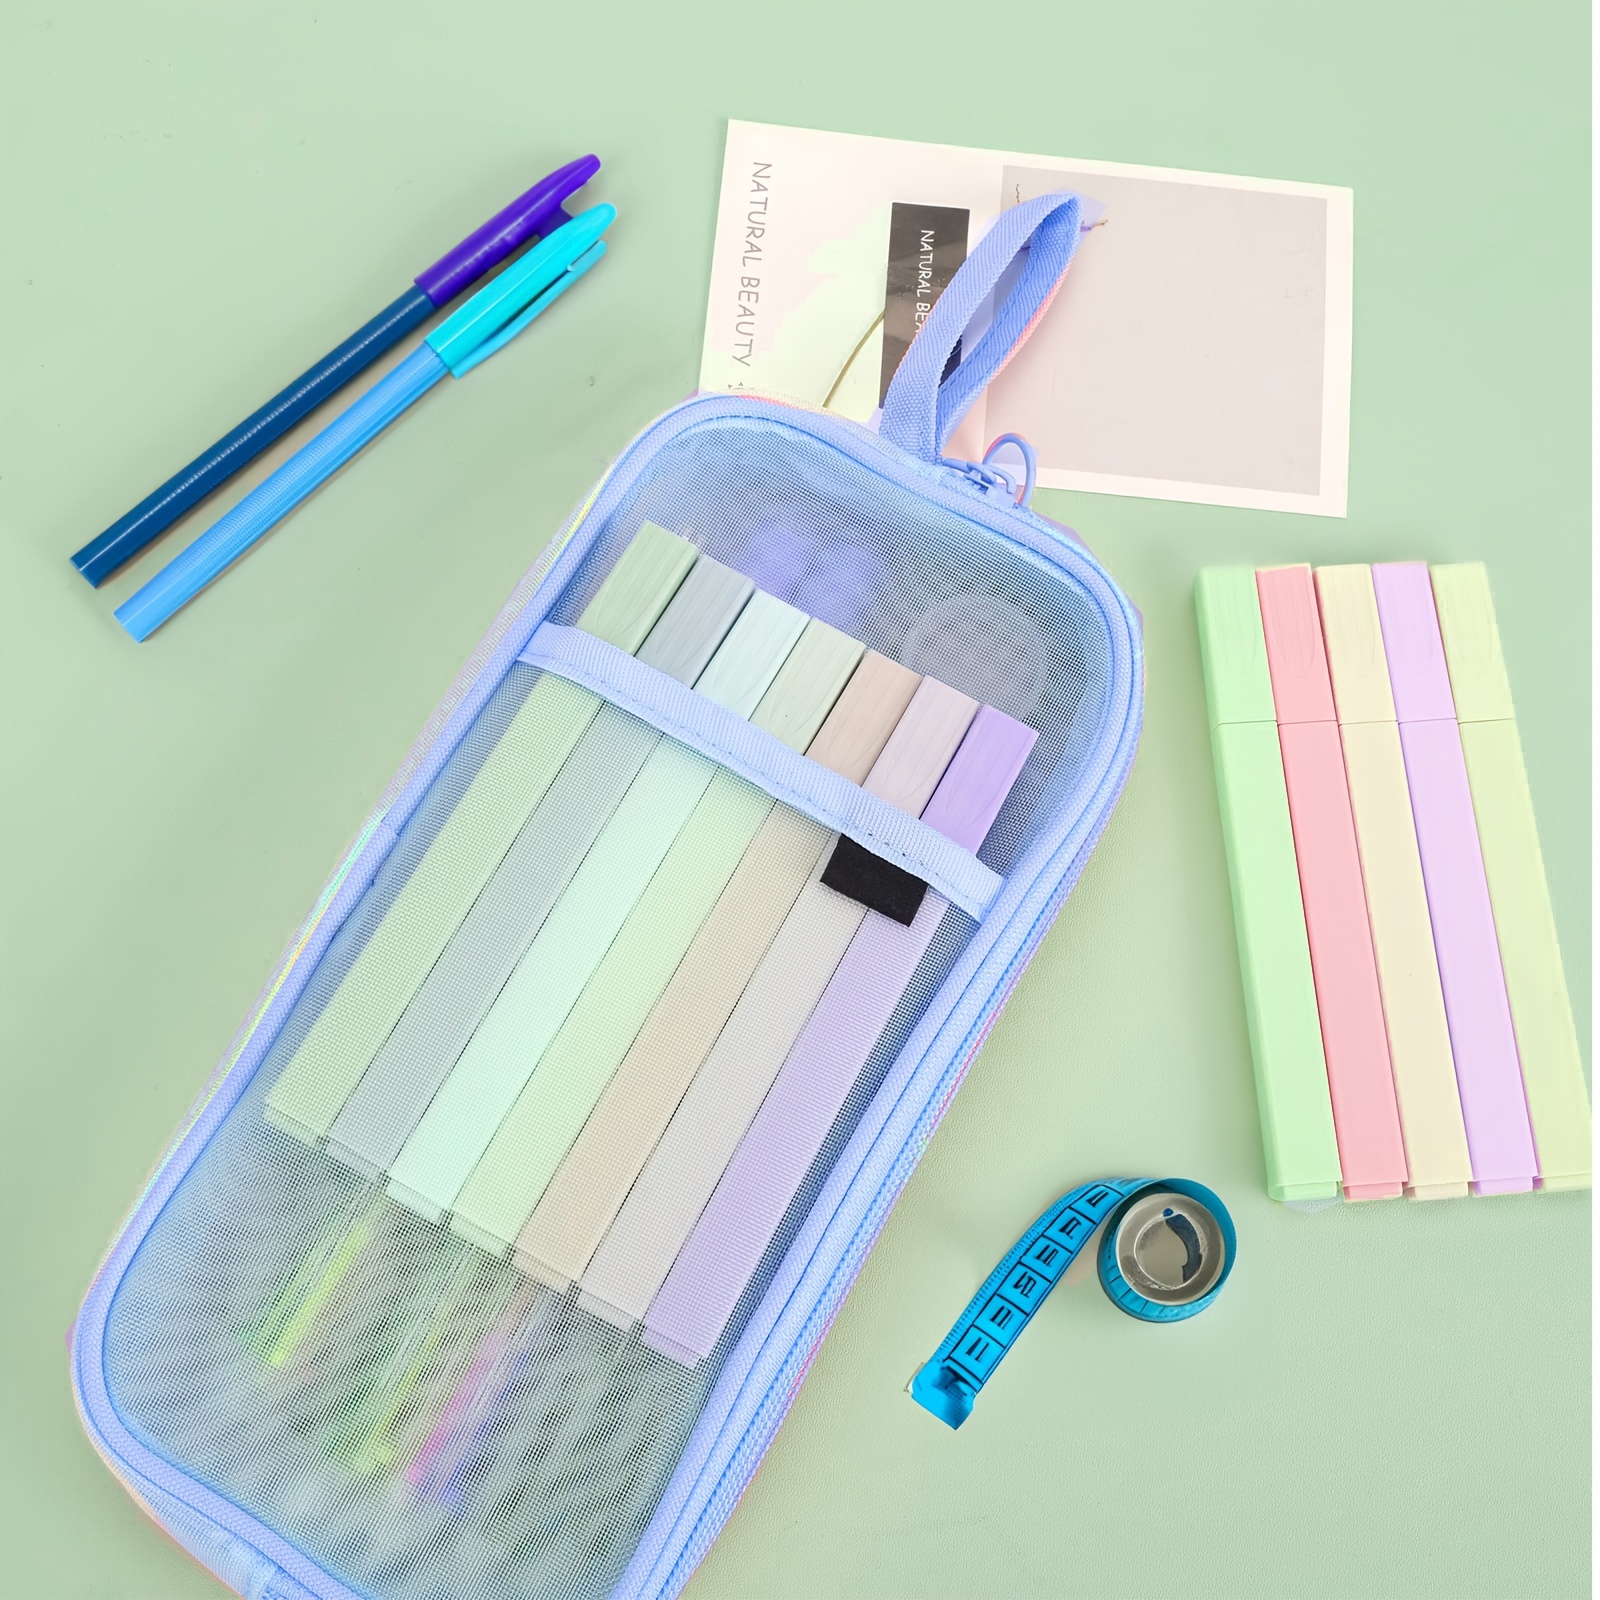 12pcs, Highlighters, Aesthetic Pastel Cute Highlighter For Bible And Pens  No Bleed, With Assorted Colors, Dry Fast Easy To Hold For Journal Planner No